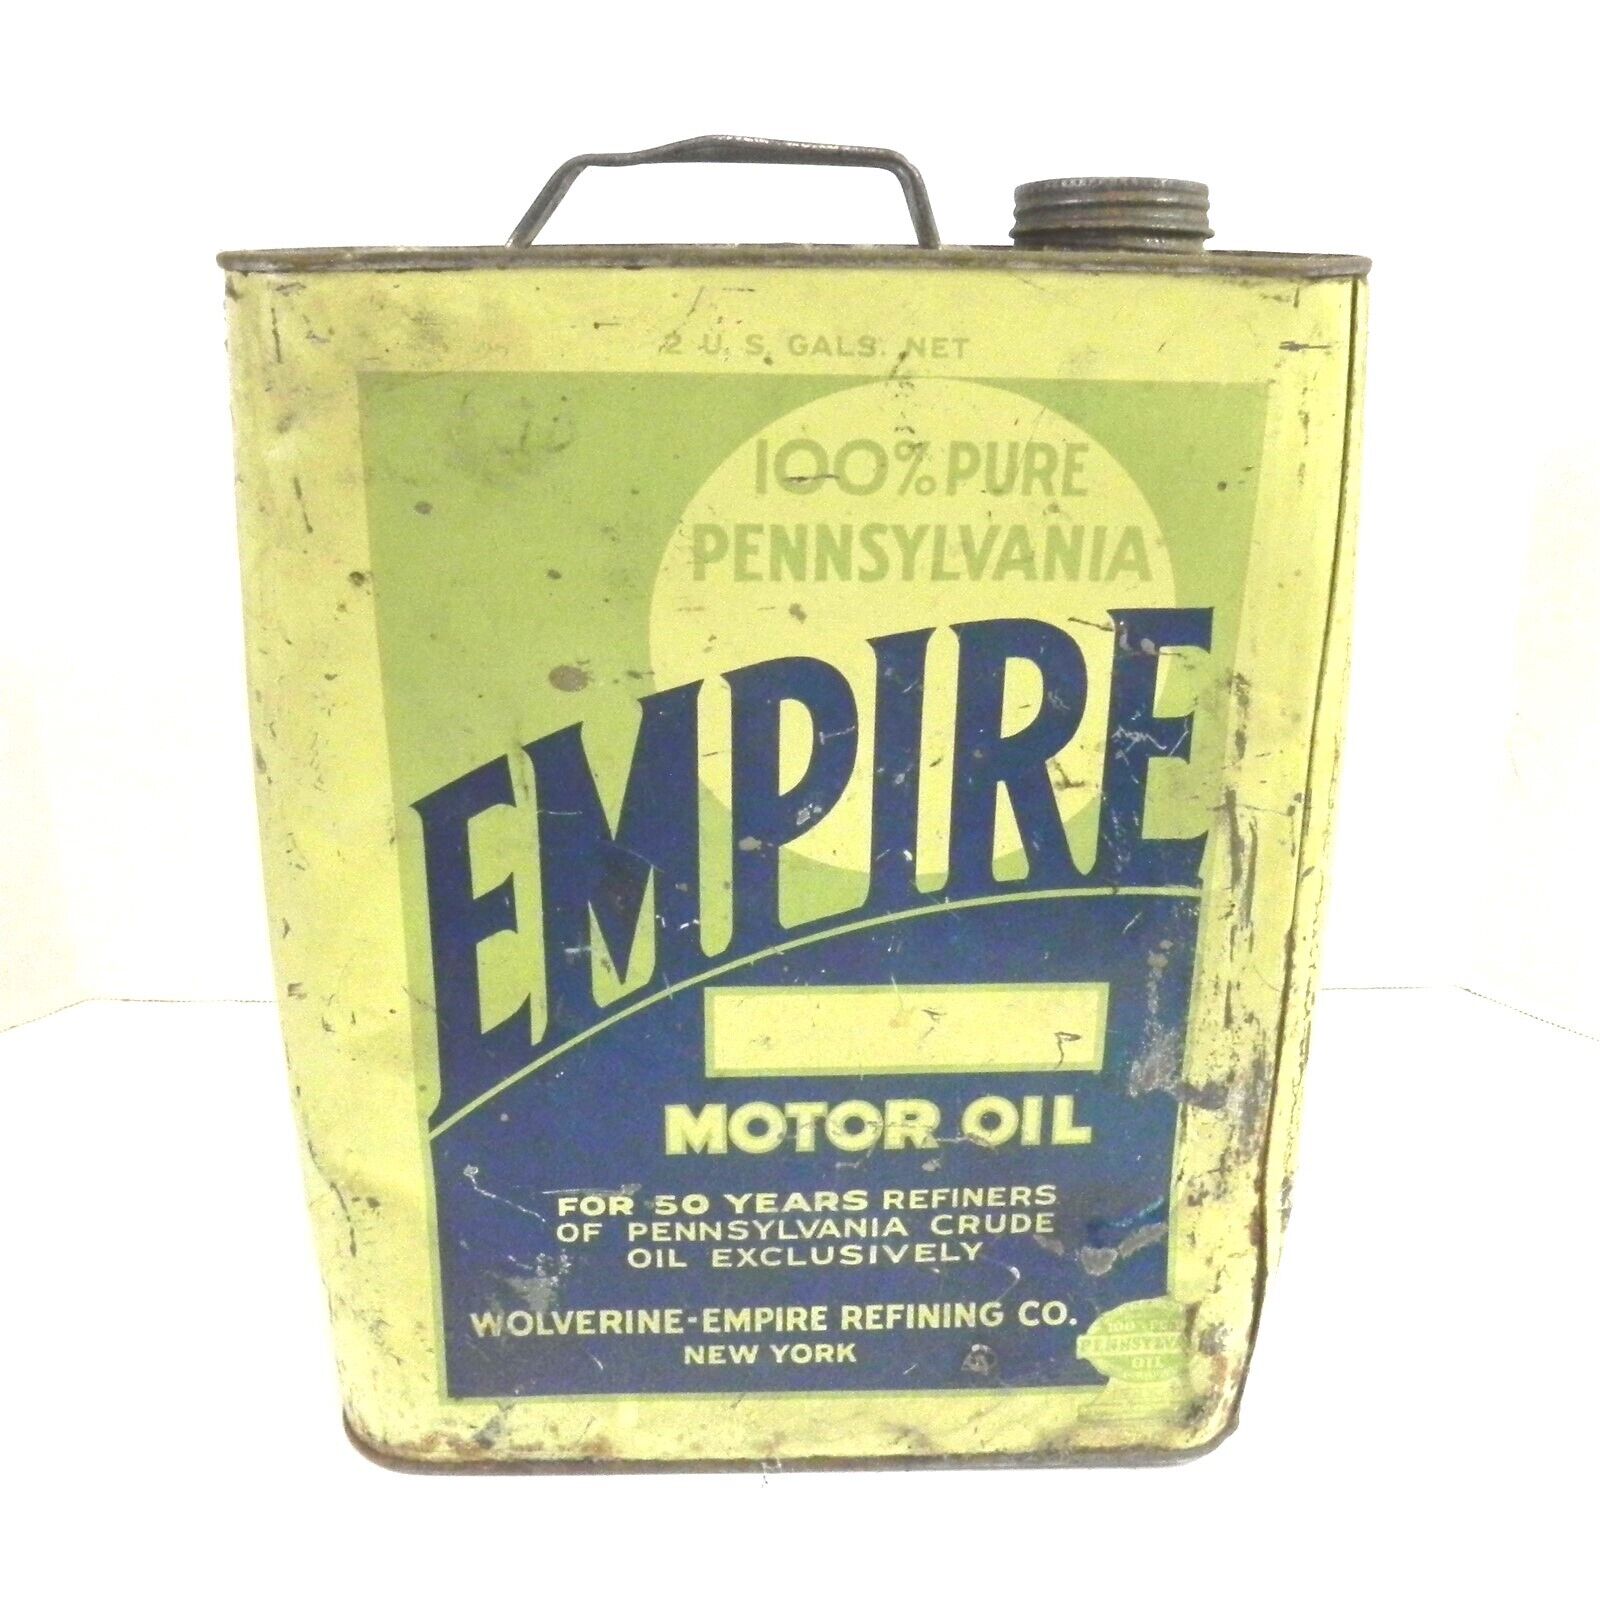 VINTAGE EMPIRE MOTOR OIL WOLVERINE-EMPIRE REFINING CO. 2 GALLON CAN EMPTY USED